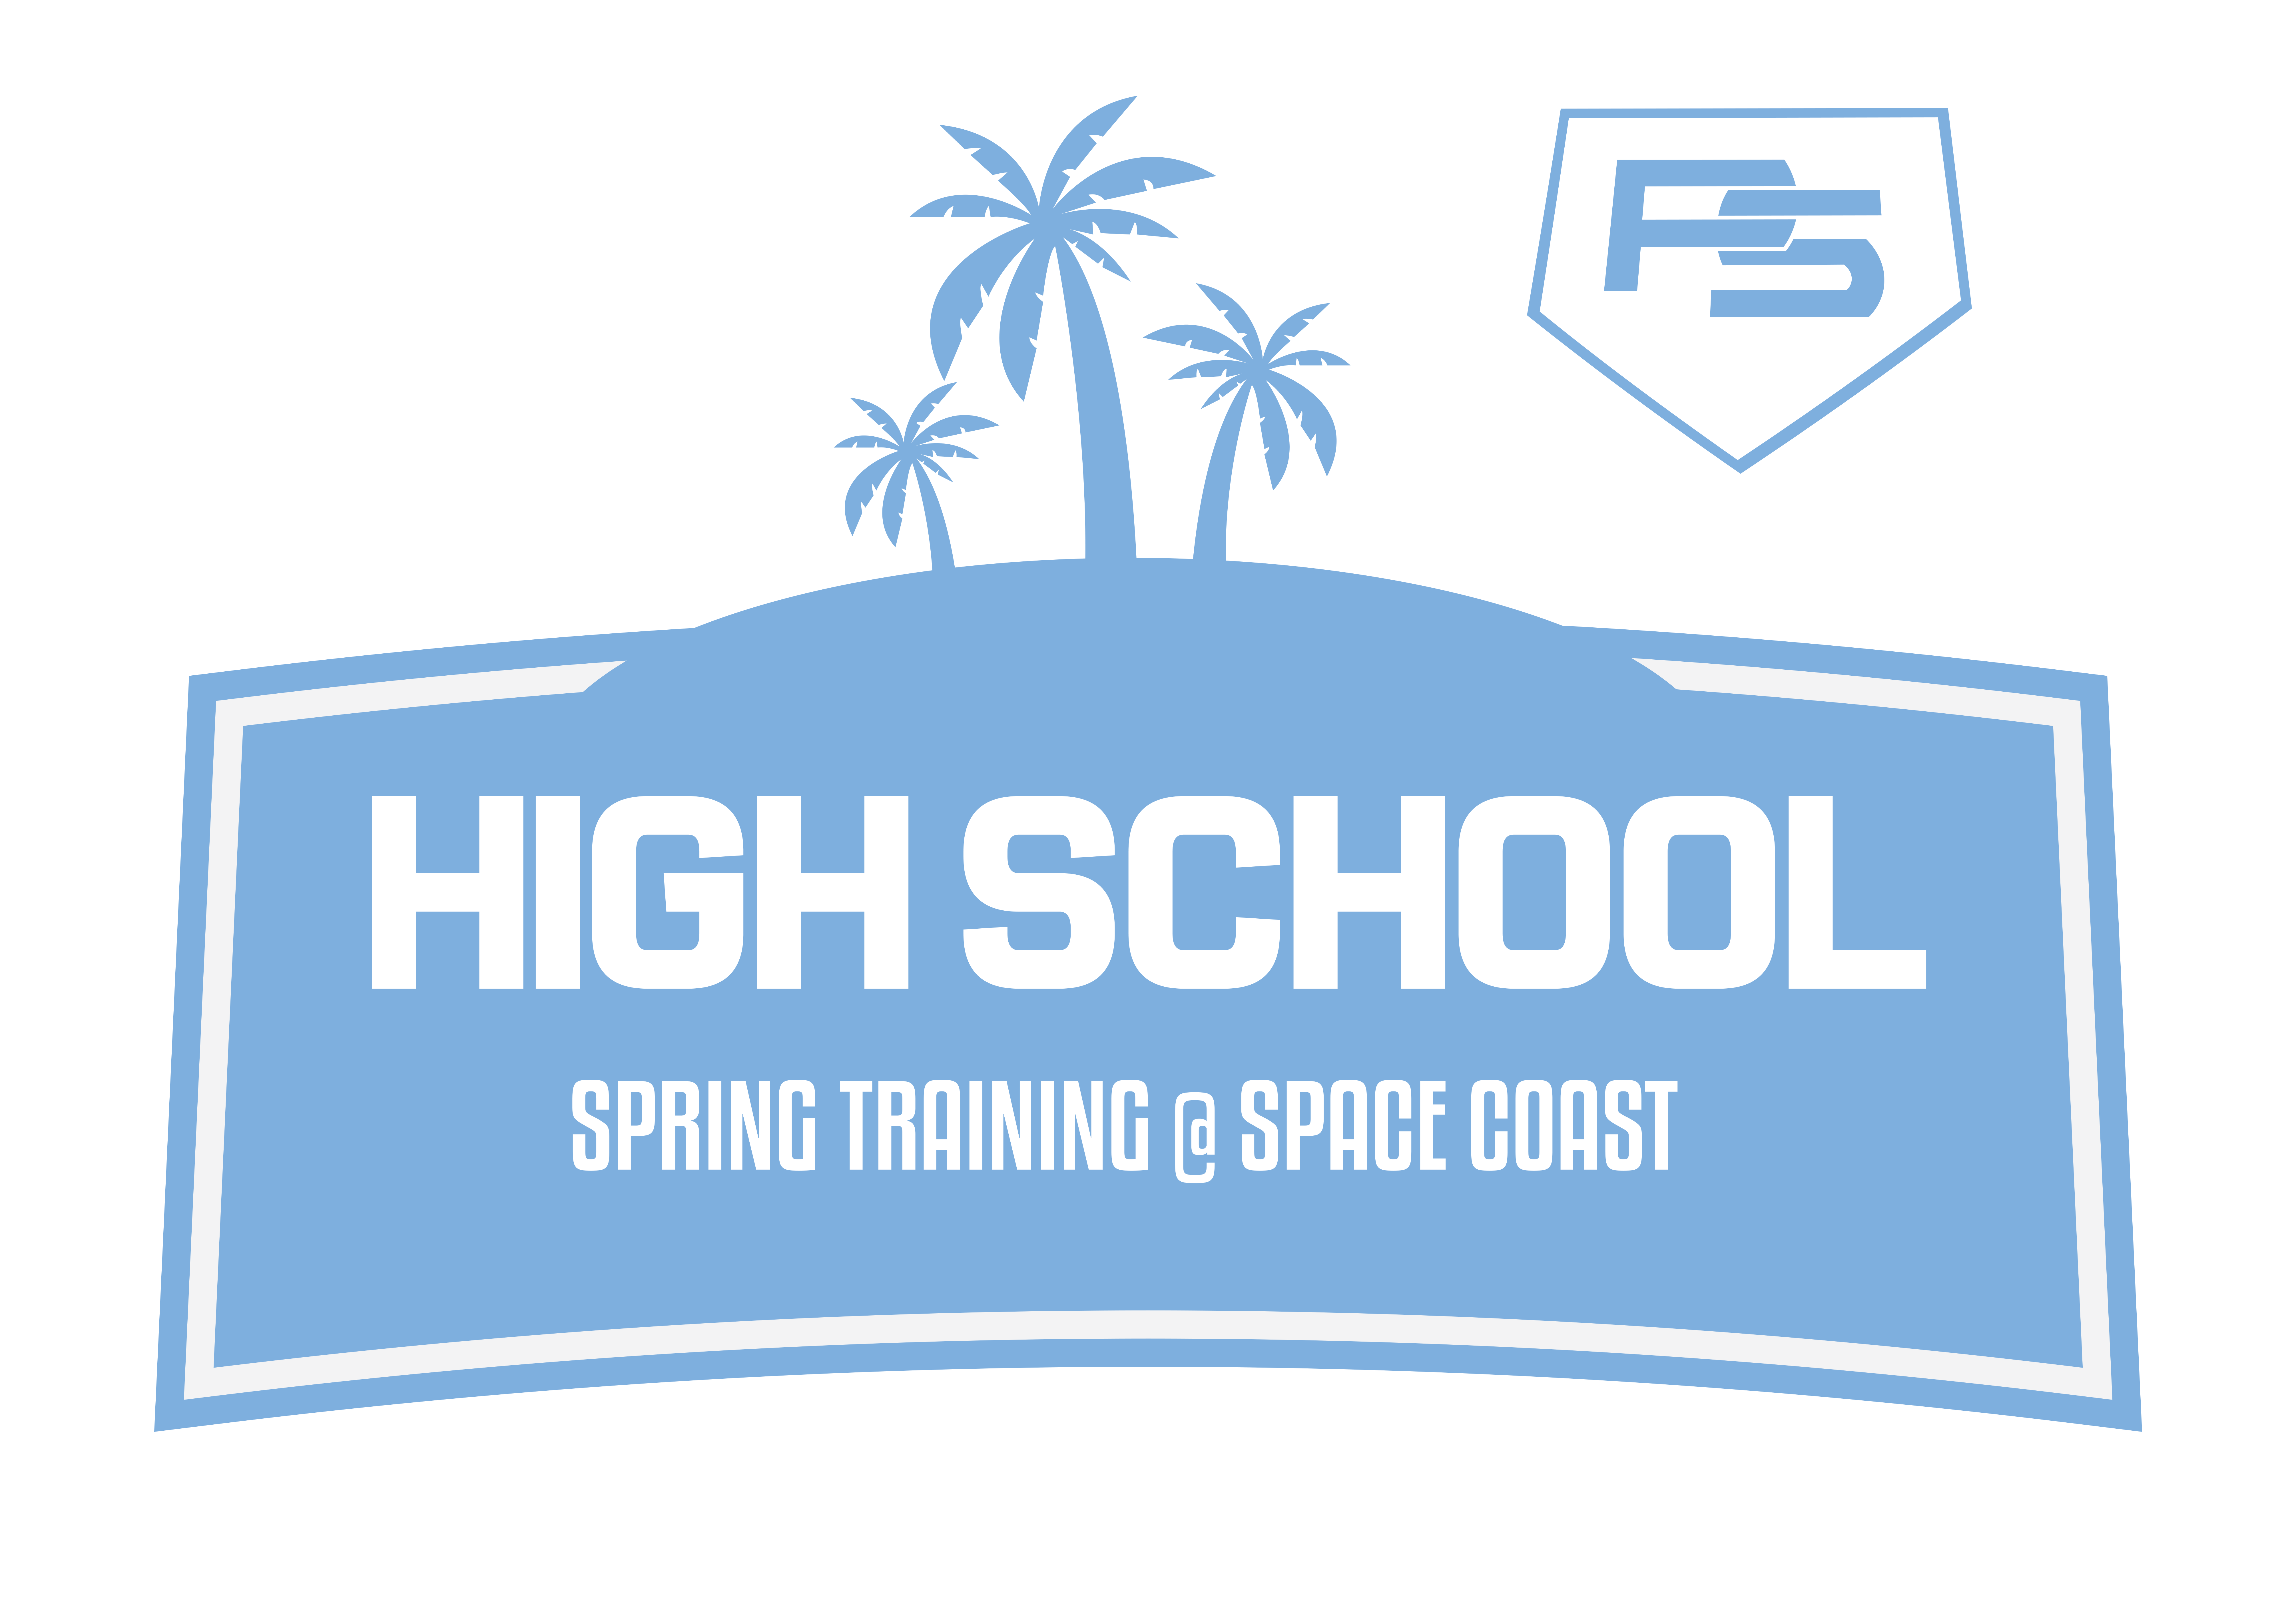 The Launch @ Space Coast - March 21-23